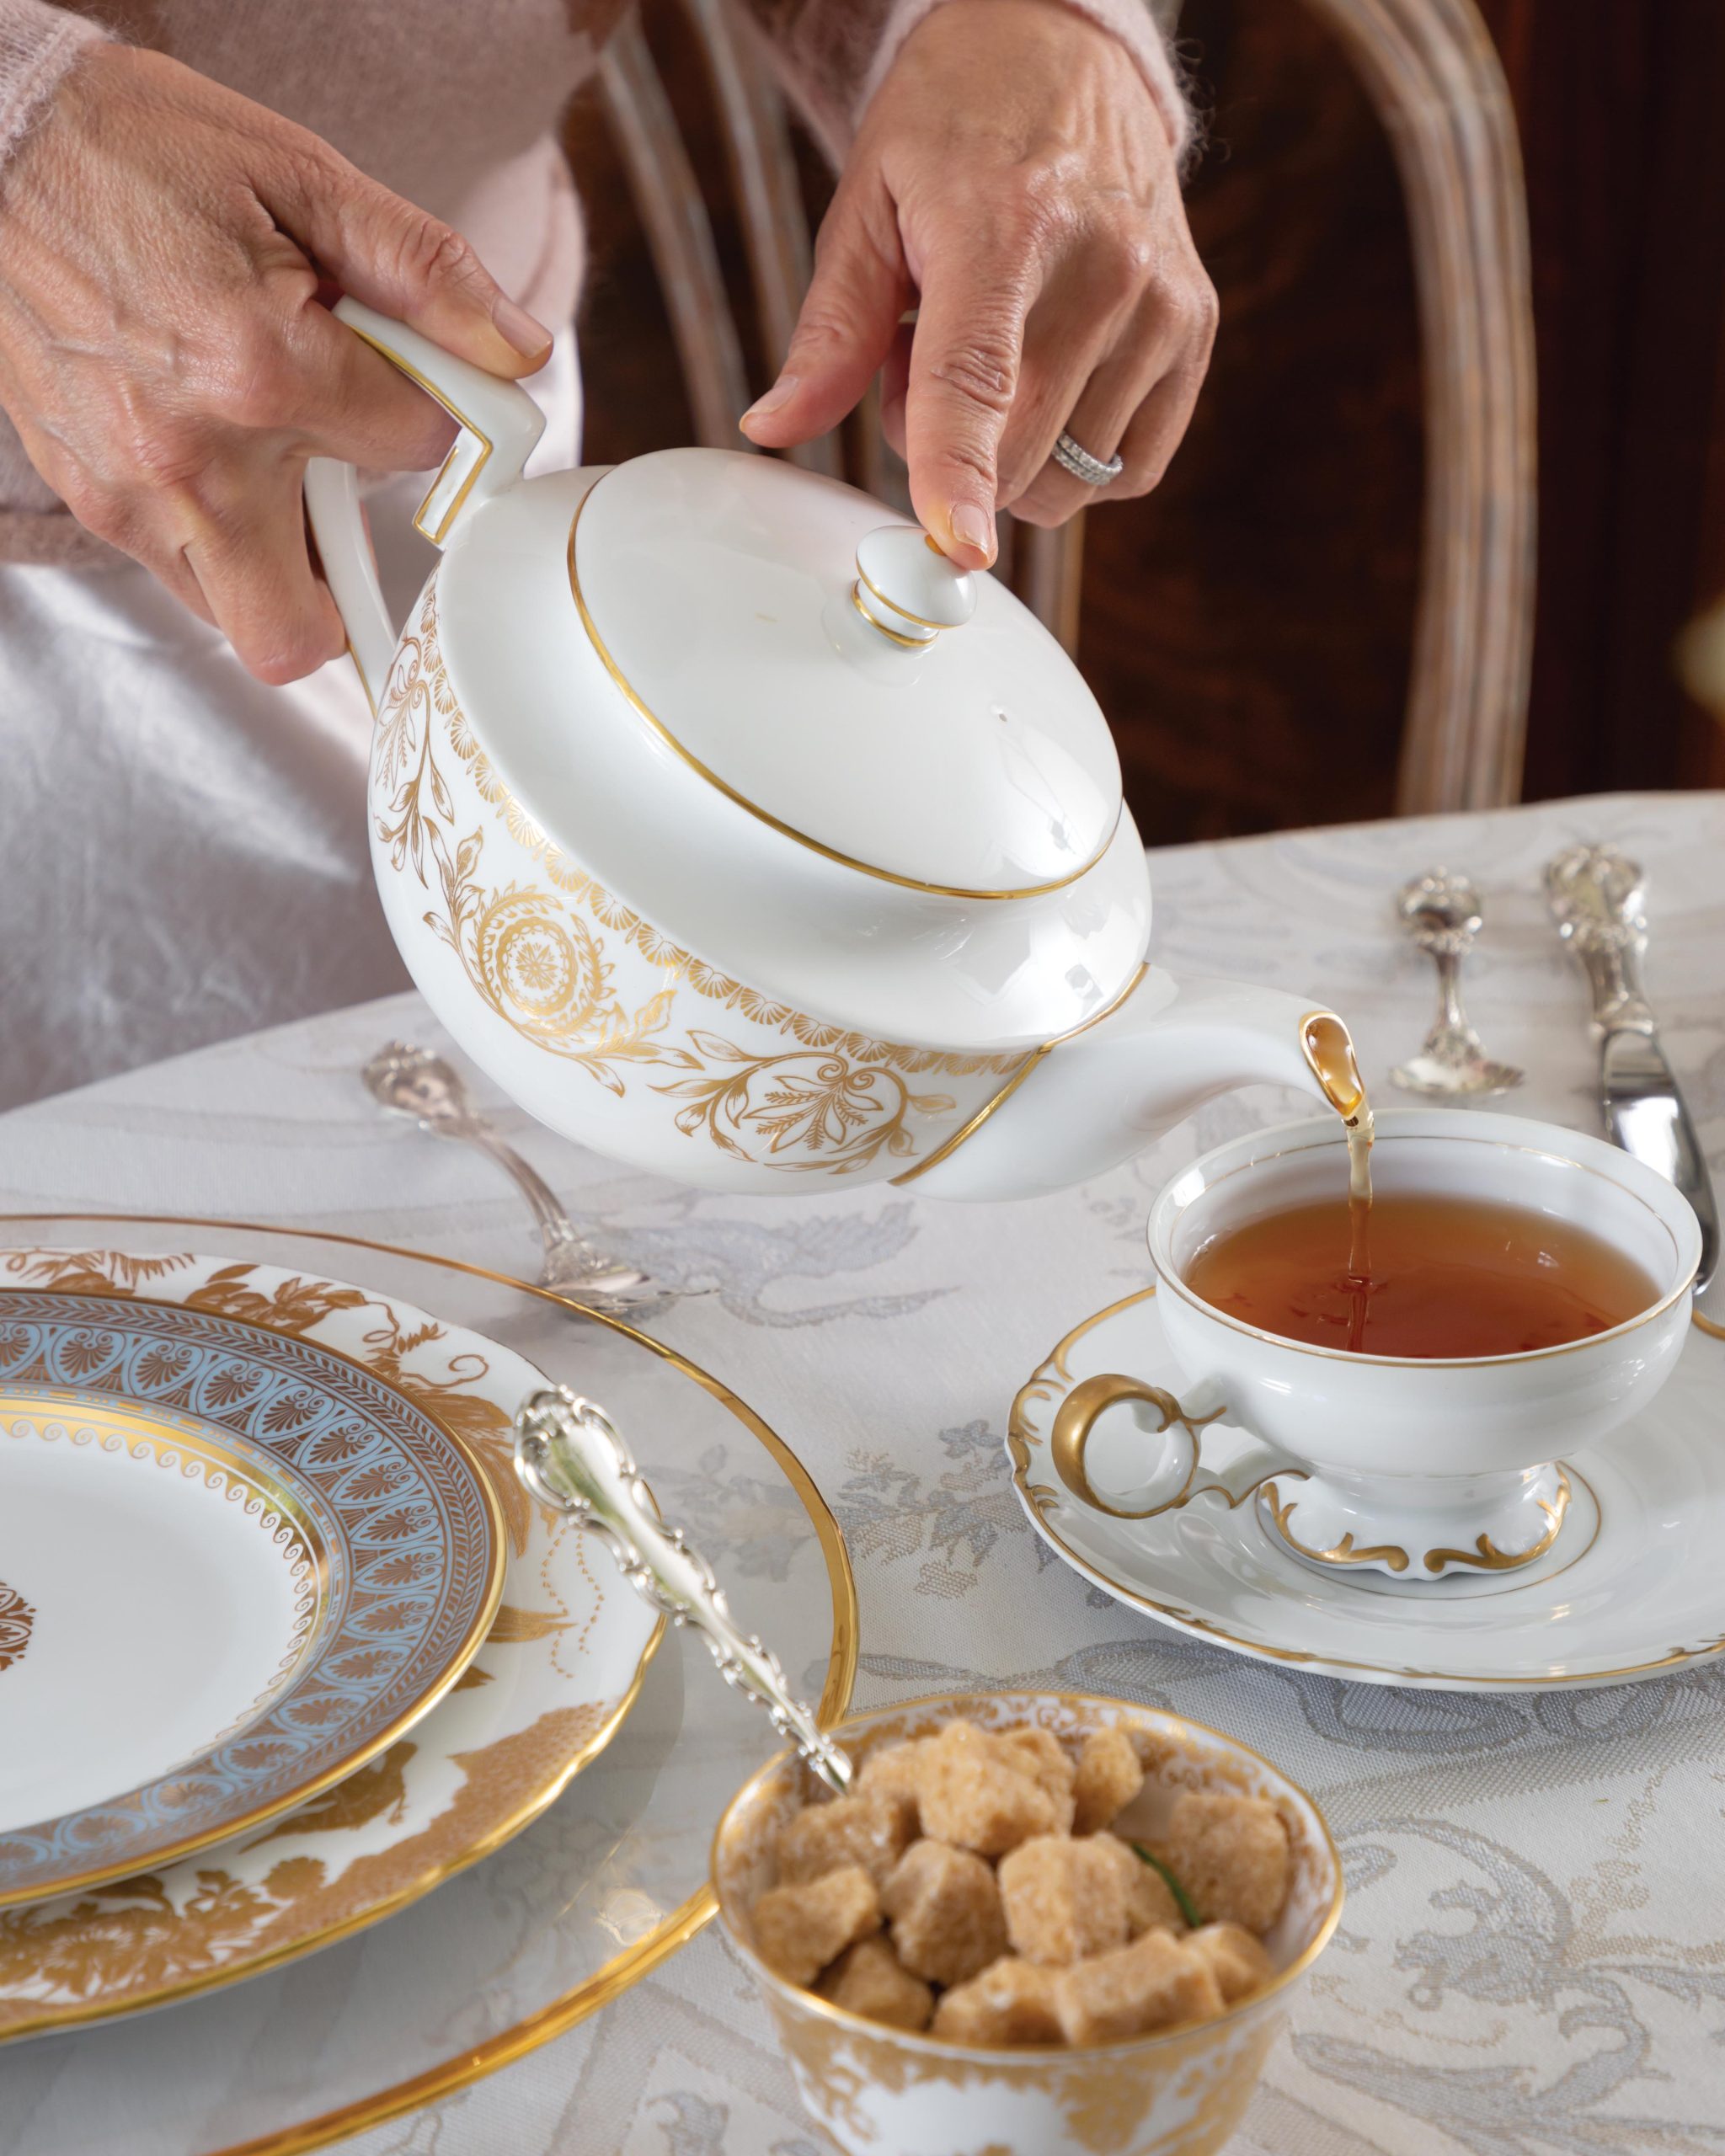 A pair of hands carefully pours from a gold-and-white teacup at a table set for afternoon tea.